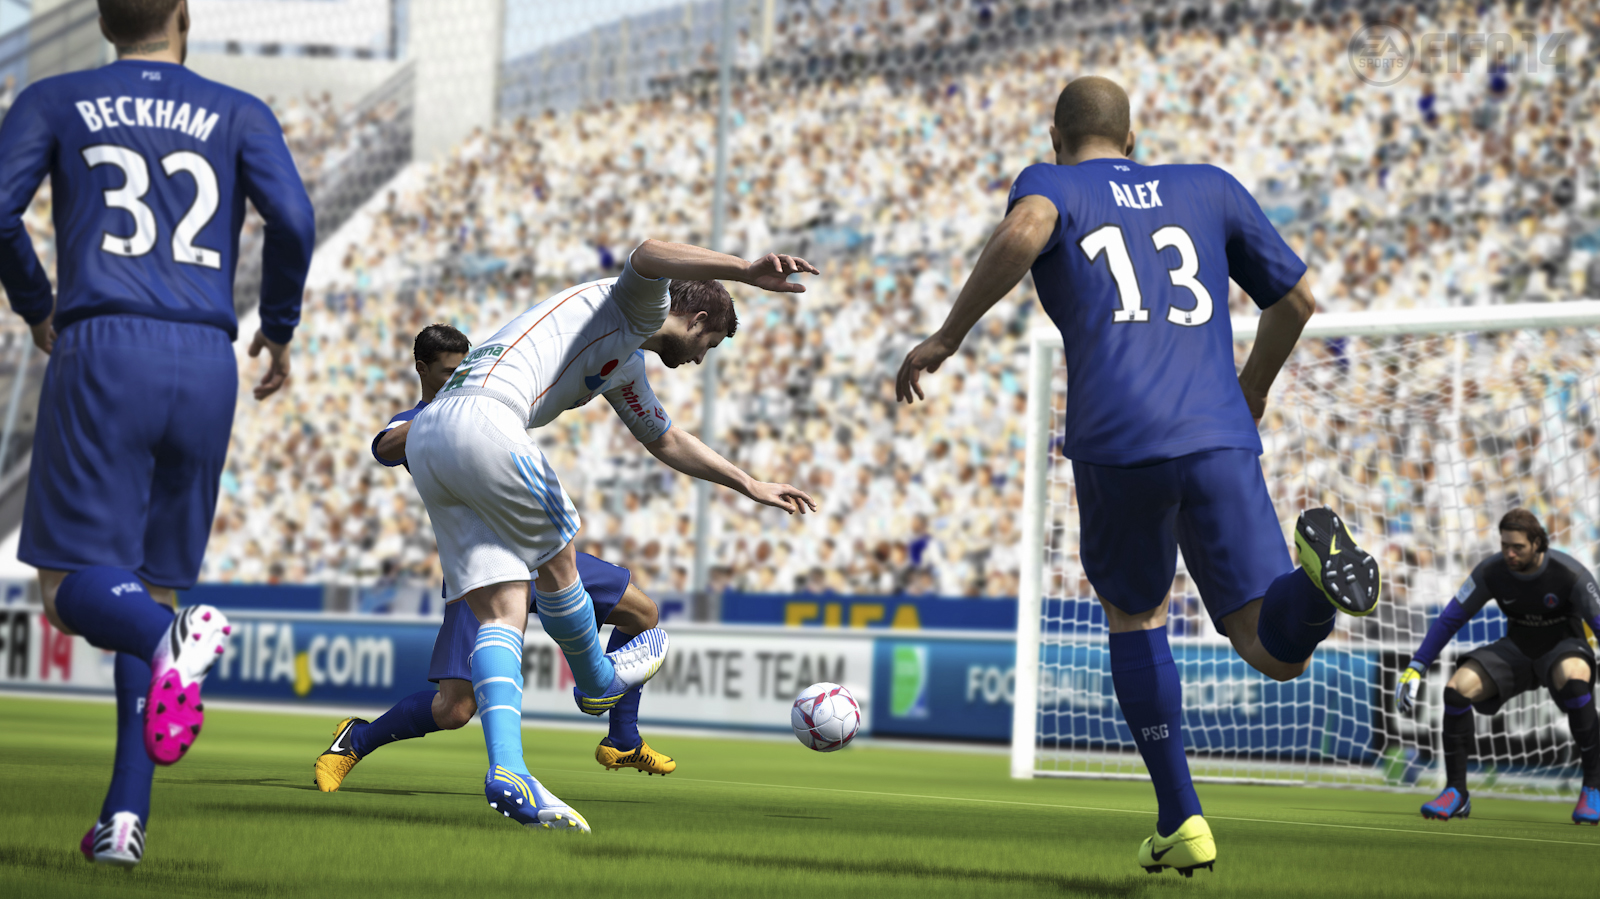 Media asset in full size related to 3dfxzone.it news item entitled as follows: EA Sports annuncia FIFA 14 e mostra i primi screenshots in-game | Image Name: news19364_FIFA-14-screenshot_4.jpg